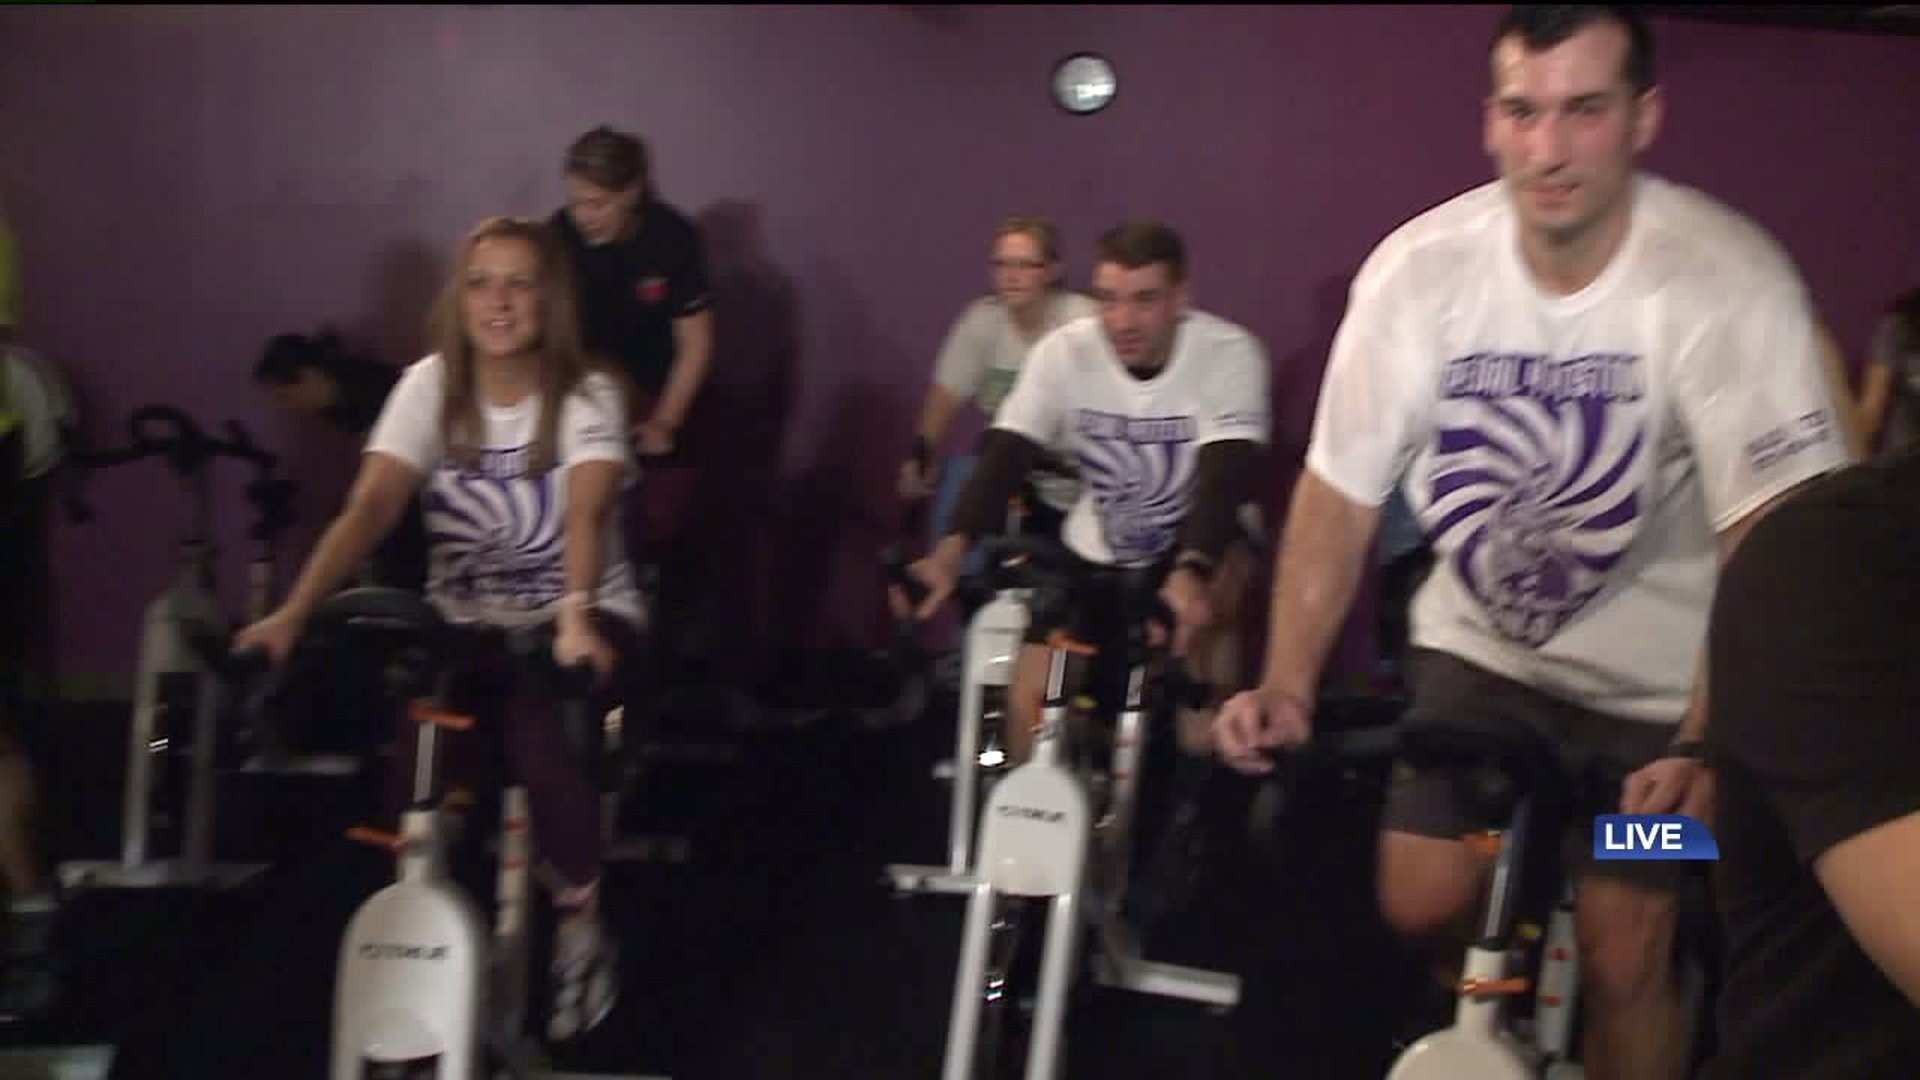 Pedaling for a Cause